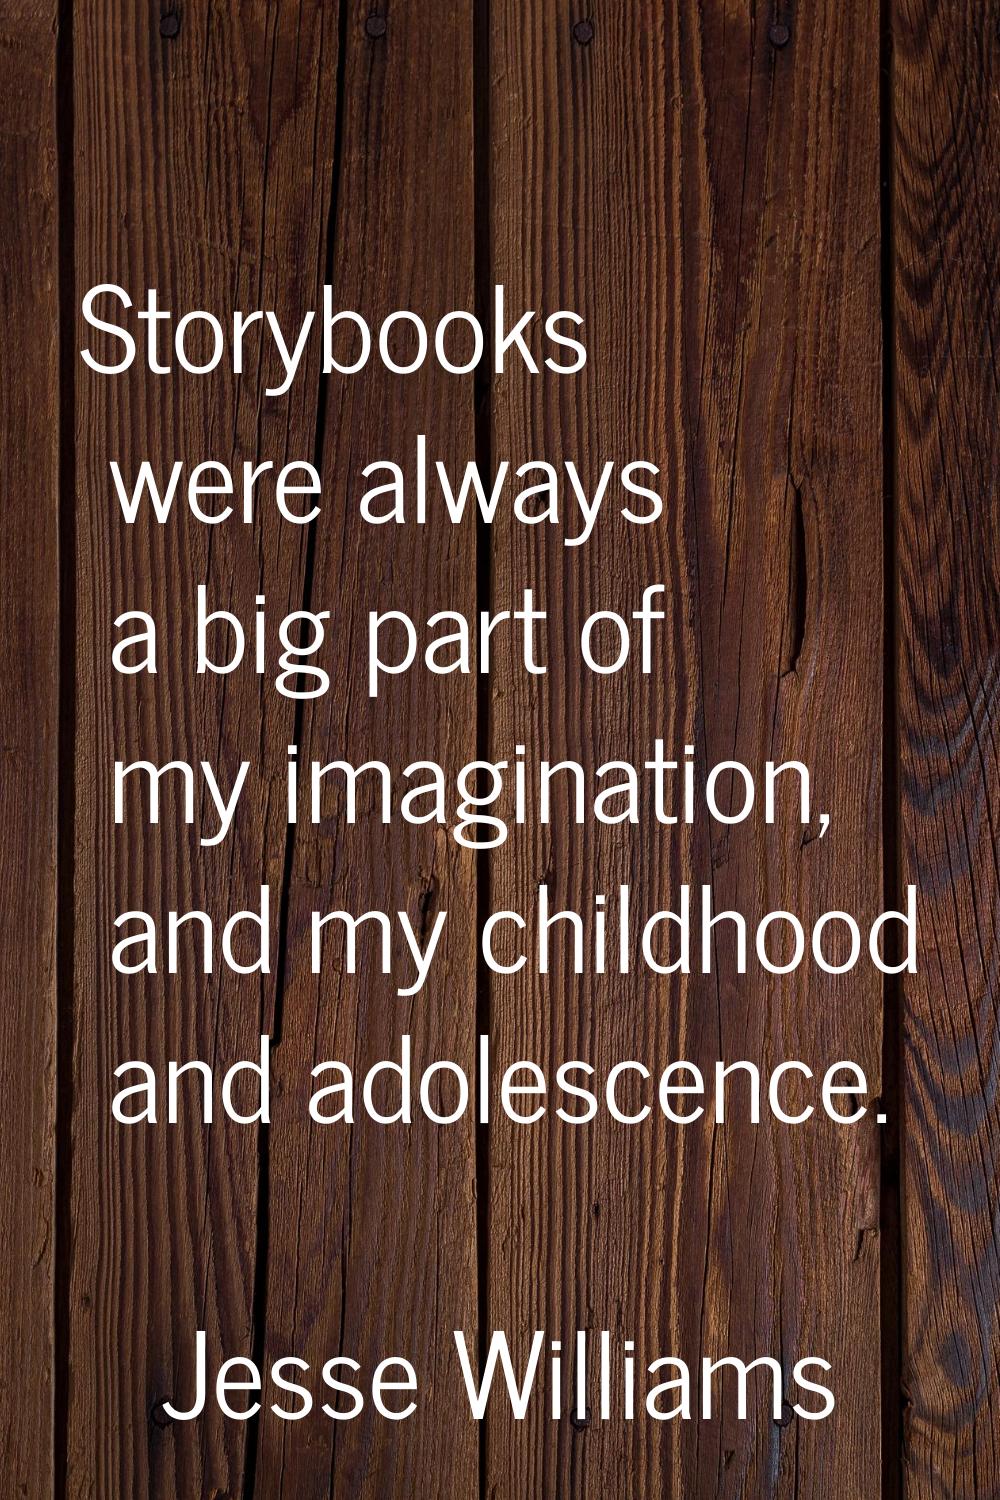 Storybooks were always a big part of my imagination, and my childhood and adolescence.